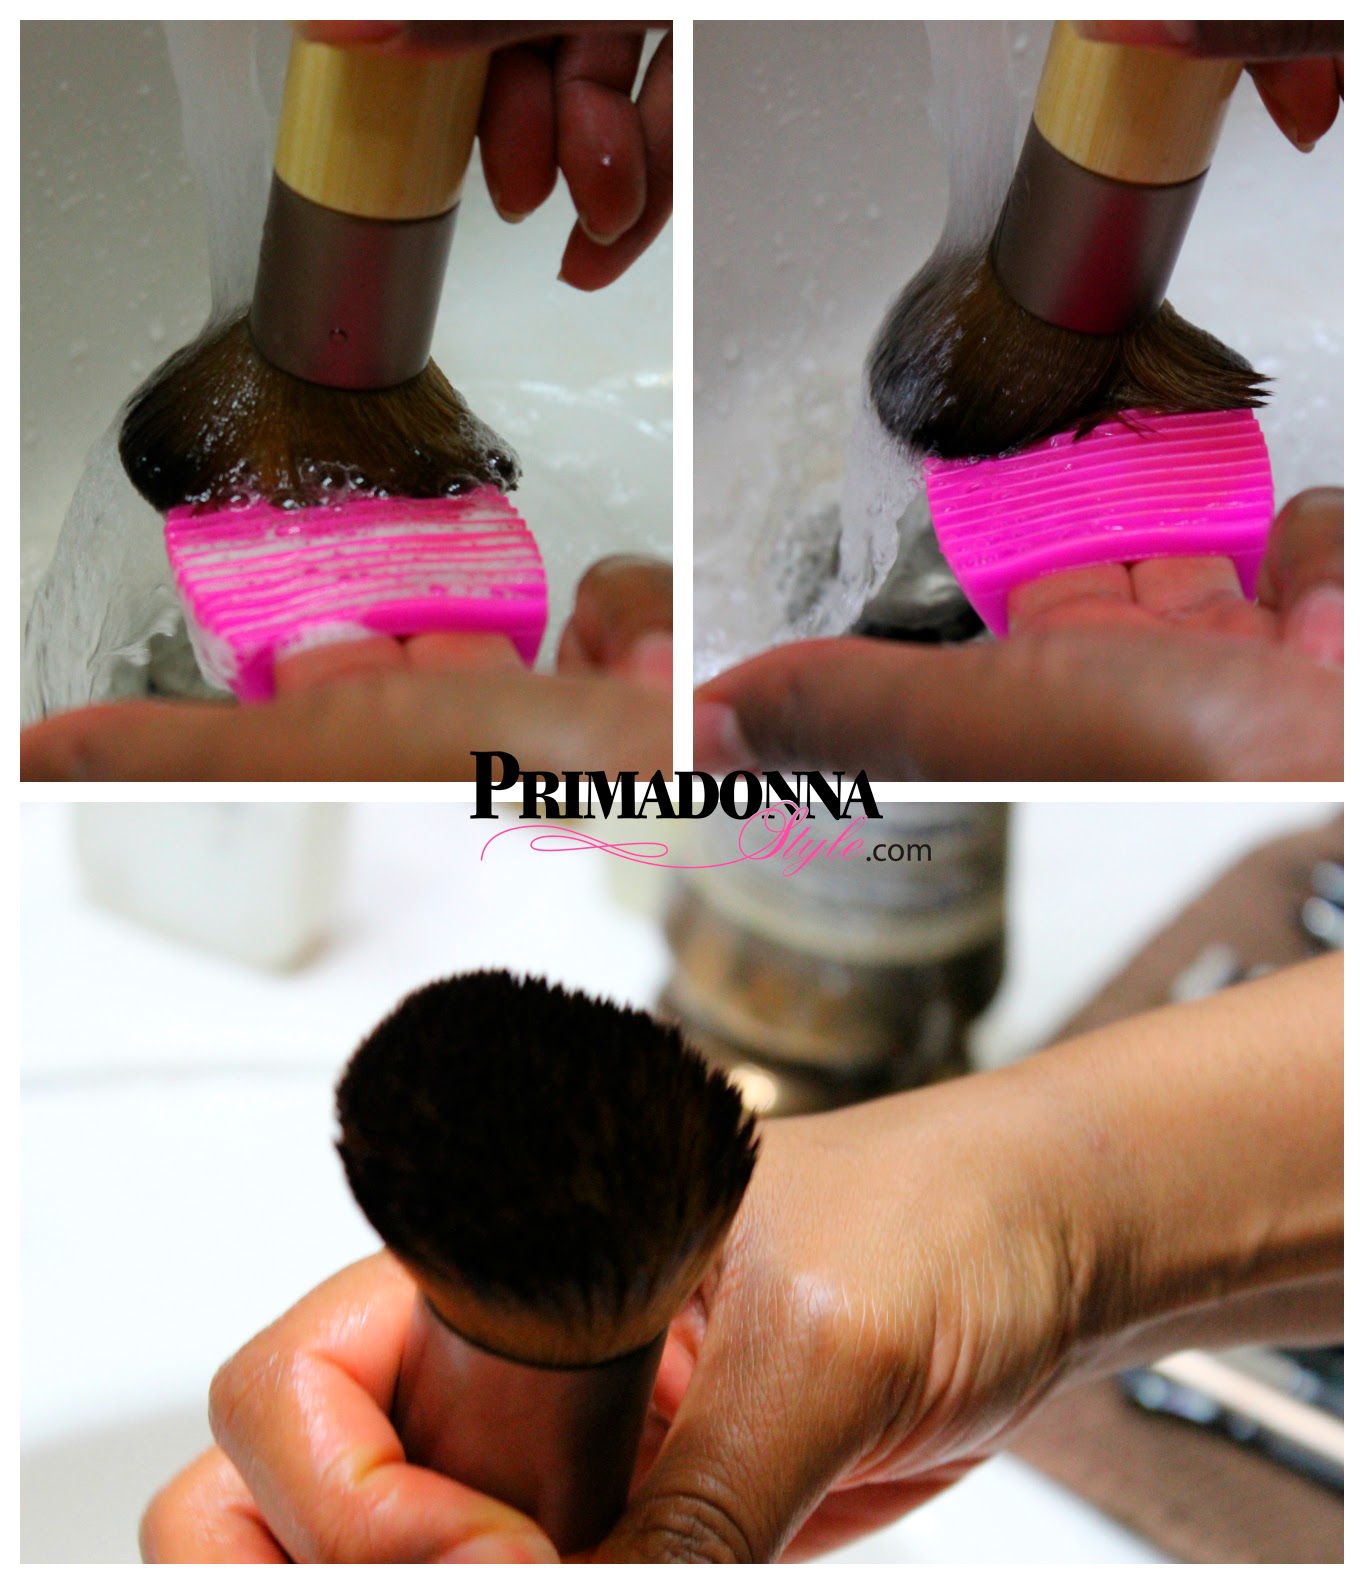 How to clean makeup brushes